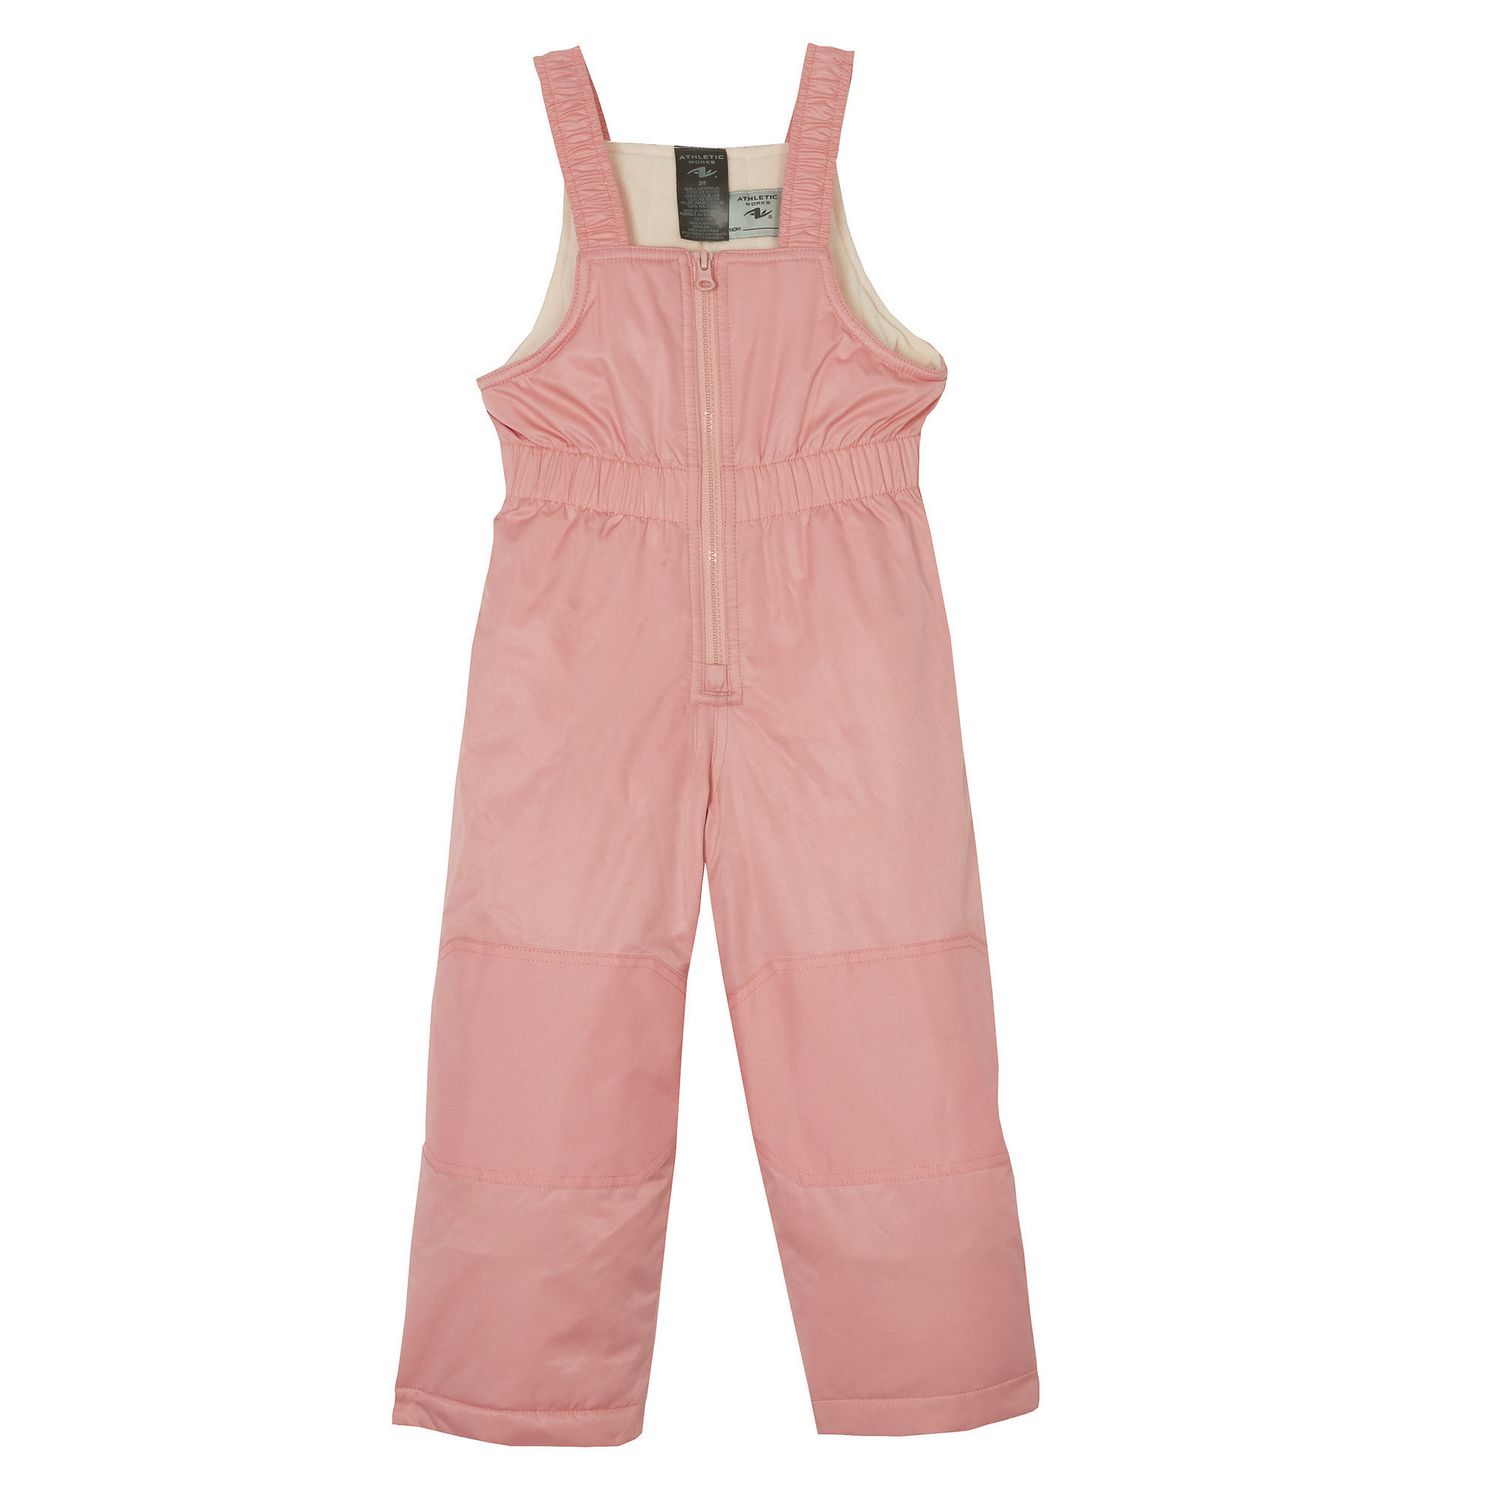 Athletic Works Toddler Girls' Snow Overalls | Walmart Canada